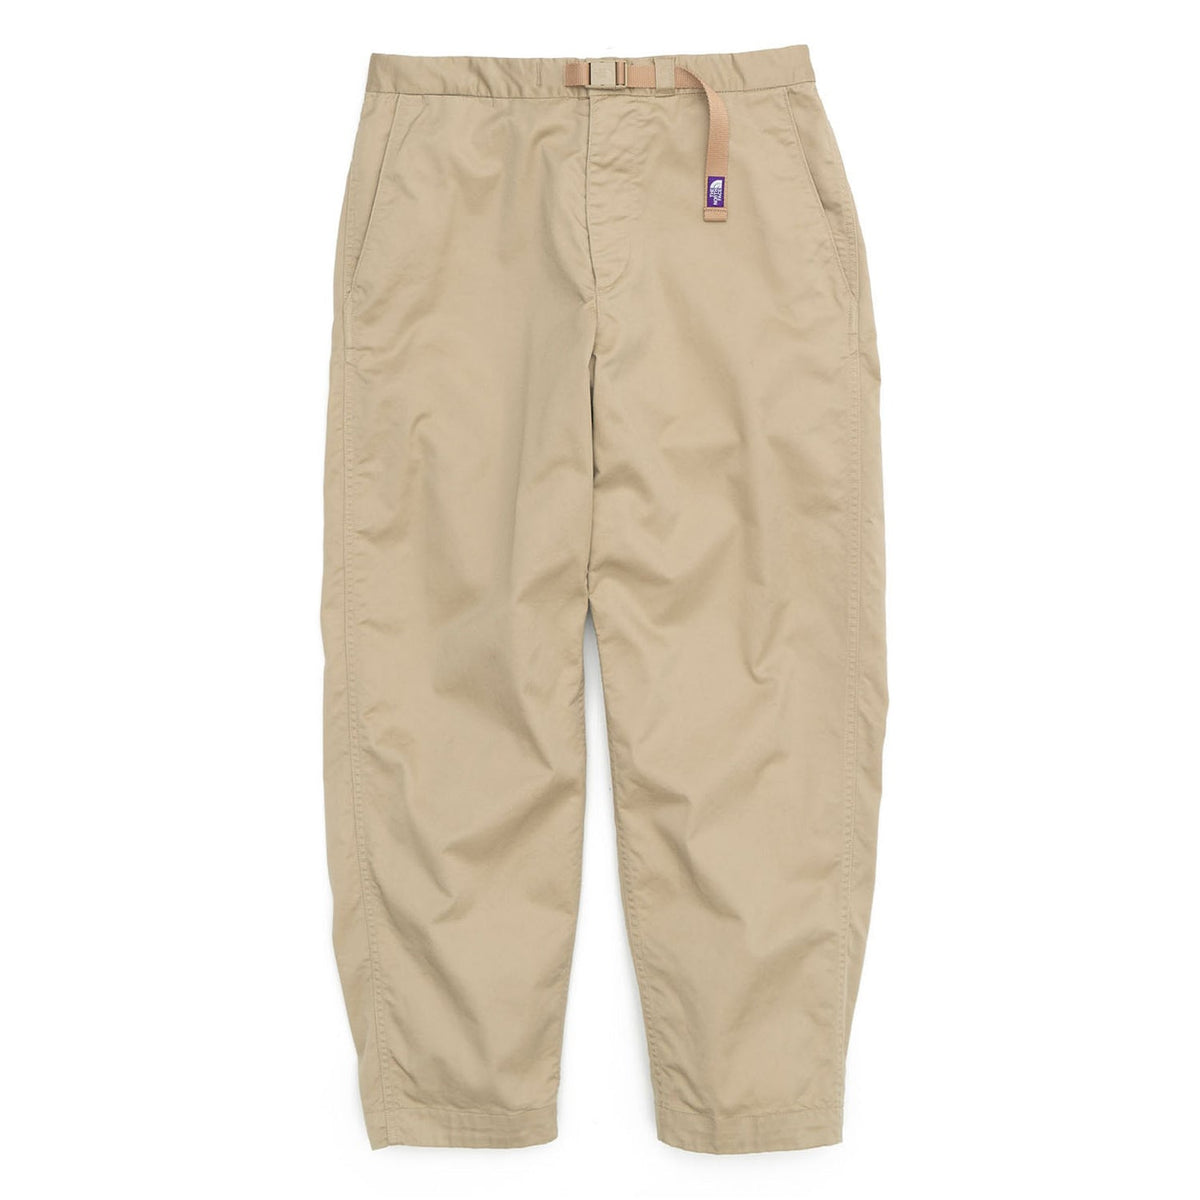 THE NORTH FACE PURPLE LABEL COOLMAX® Stretch Denim Pants With Belt